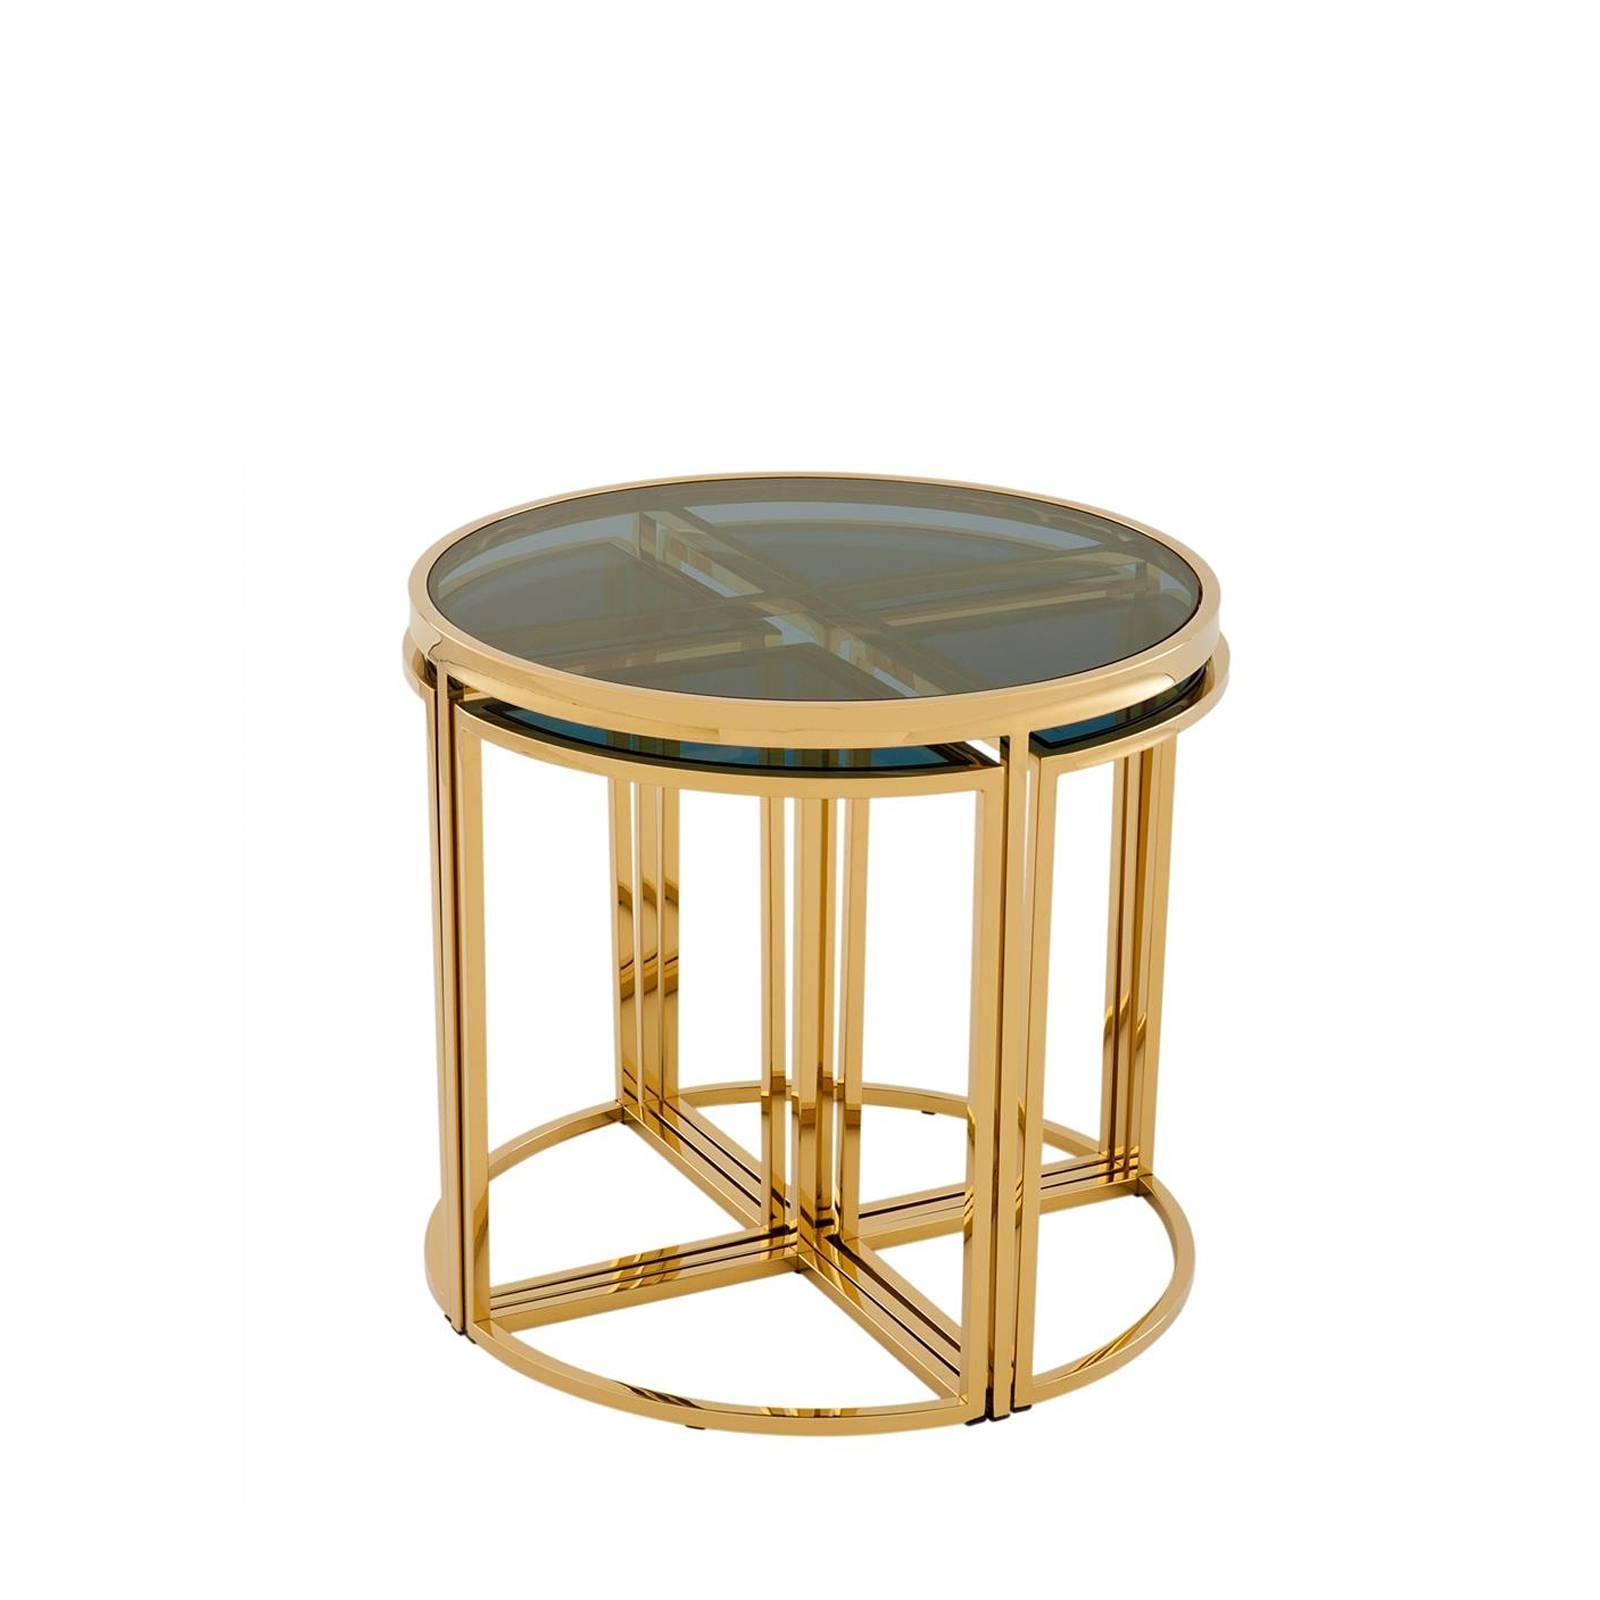 Side table four pieces with gold finish structure
and smoked glass top. One side table included four small
side tables. Also available in polished stainless steel 
and smoked glass top.
